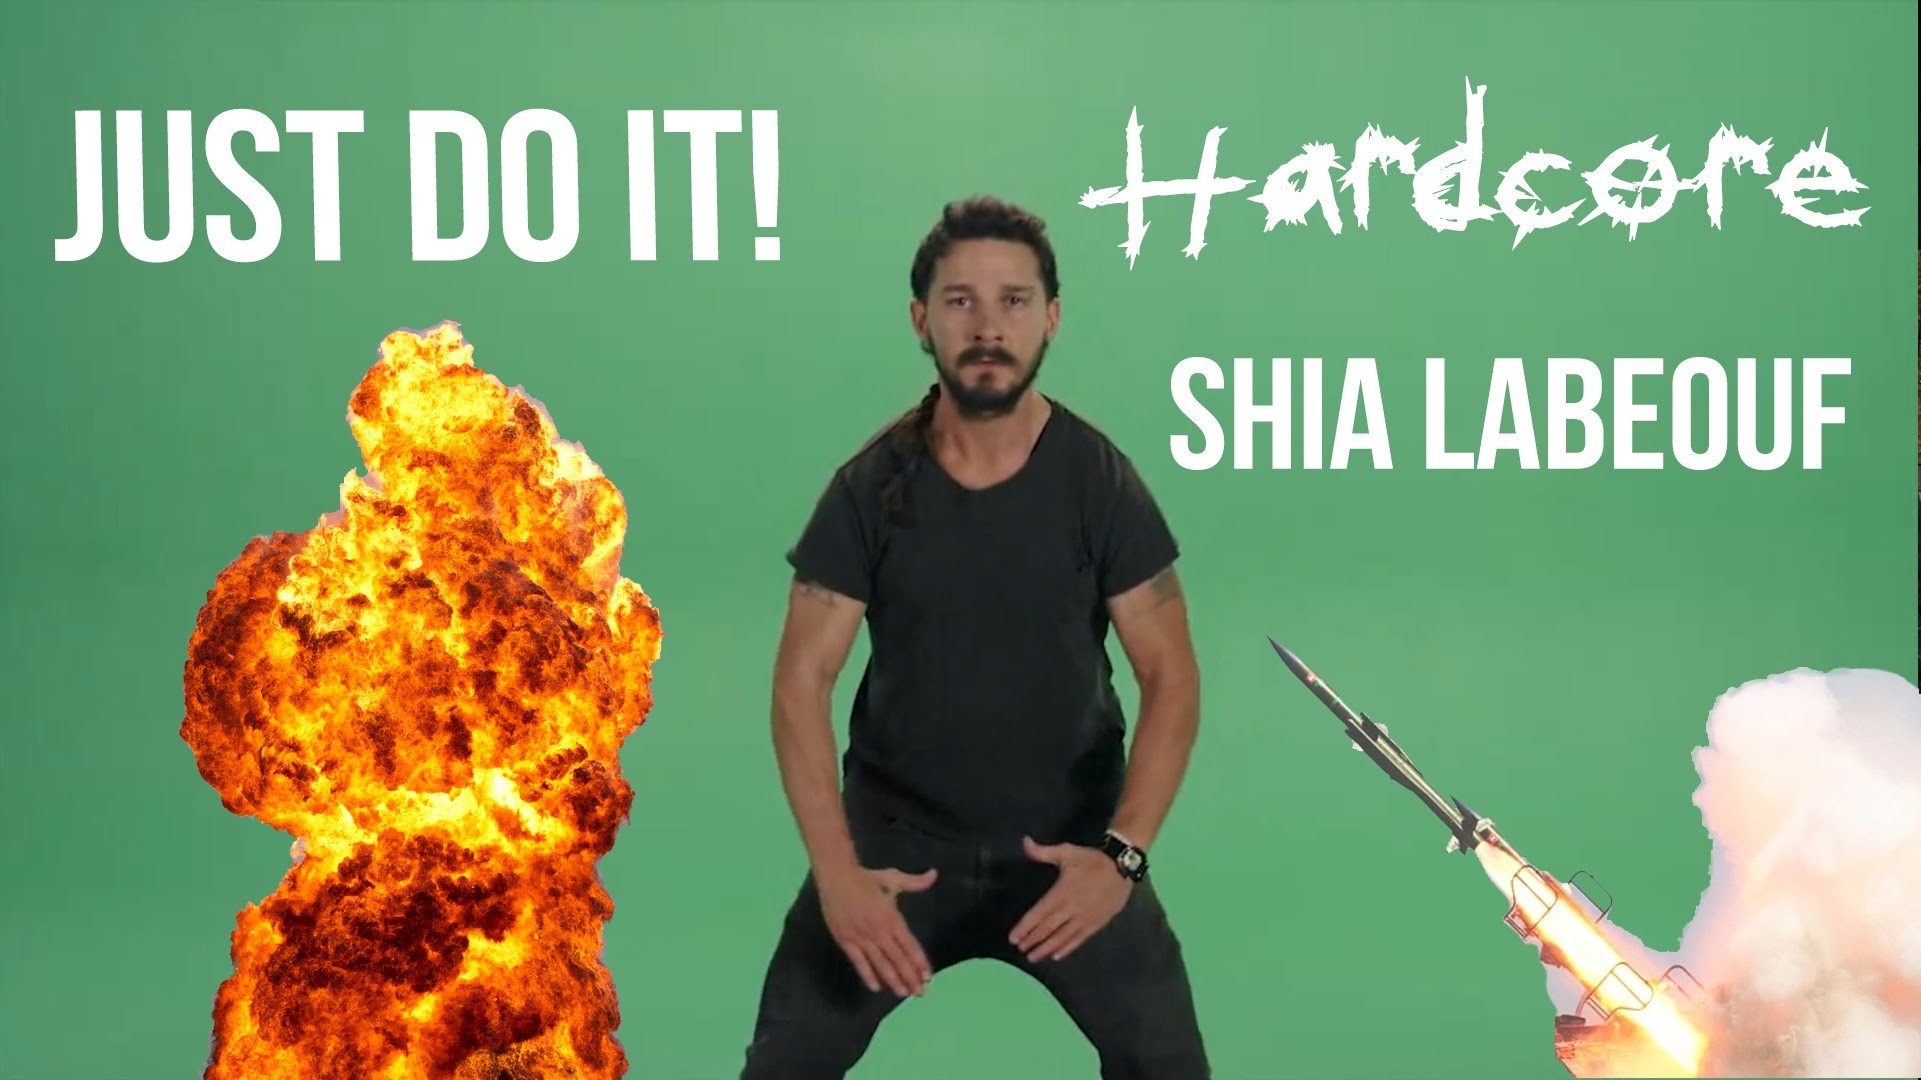 1921x1080 Shia LaBeouf wants you to JUST DO IT!.jpg